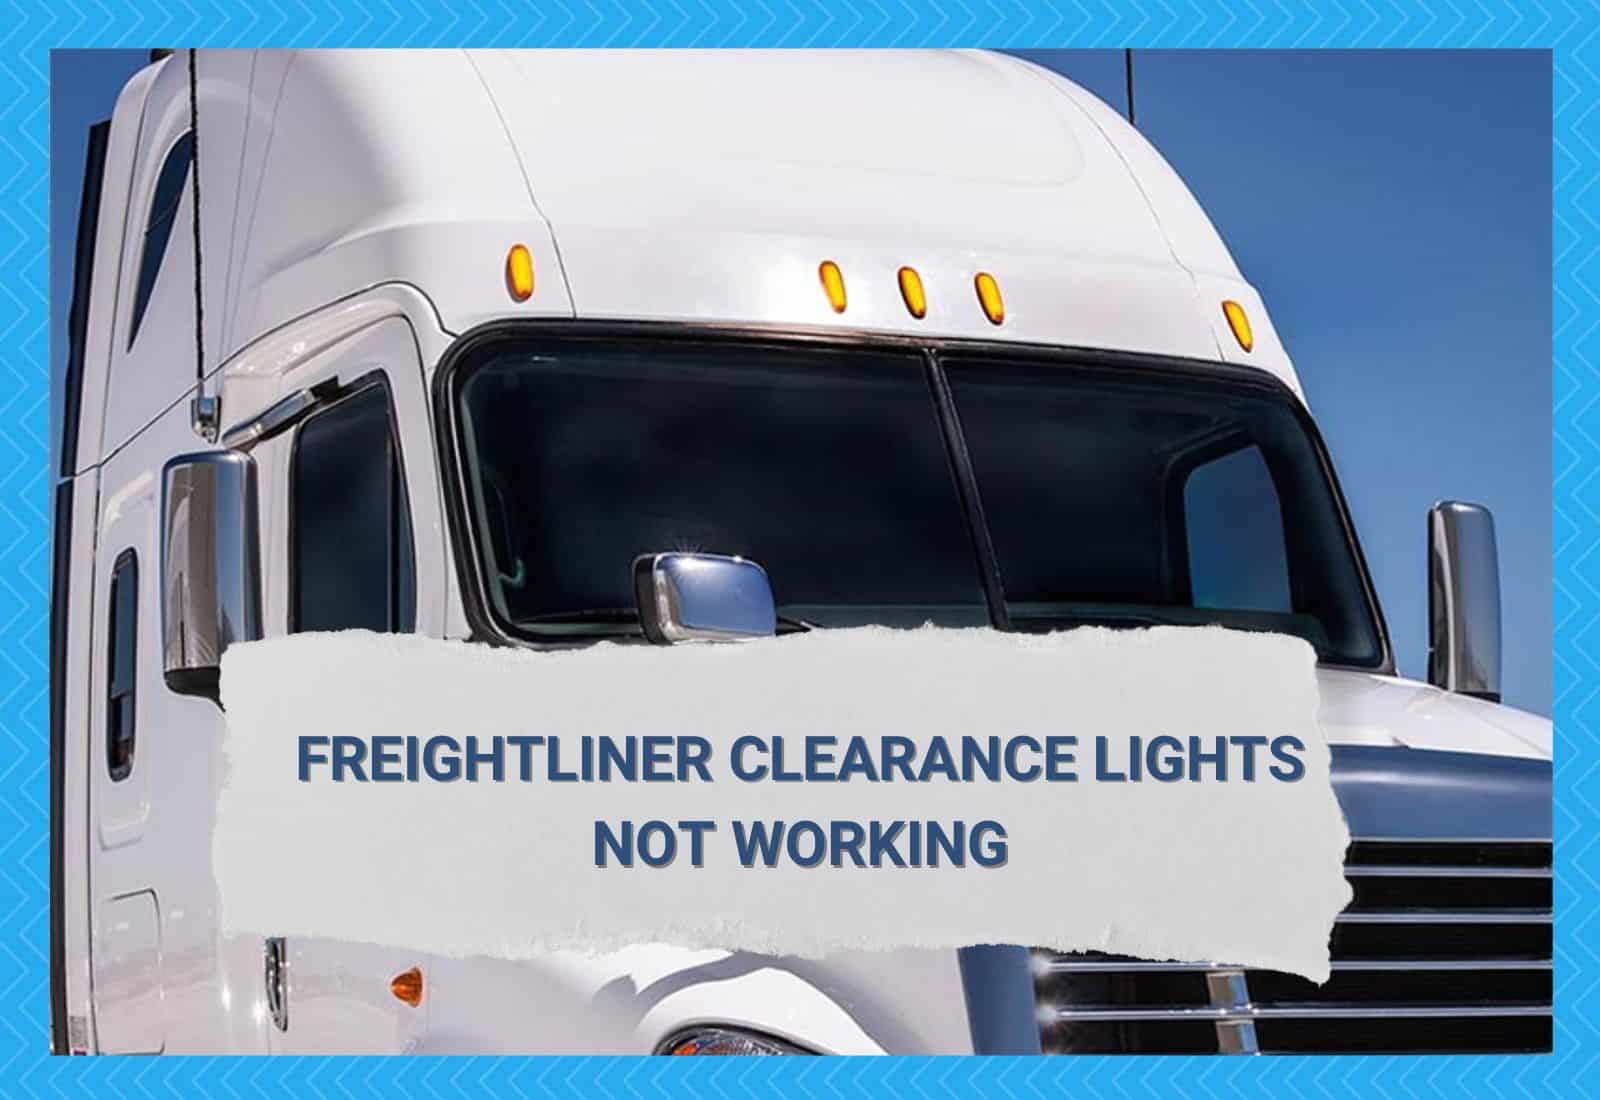 Freightliner Clearance Lights Not Working